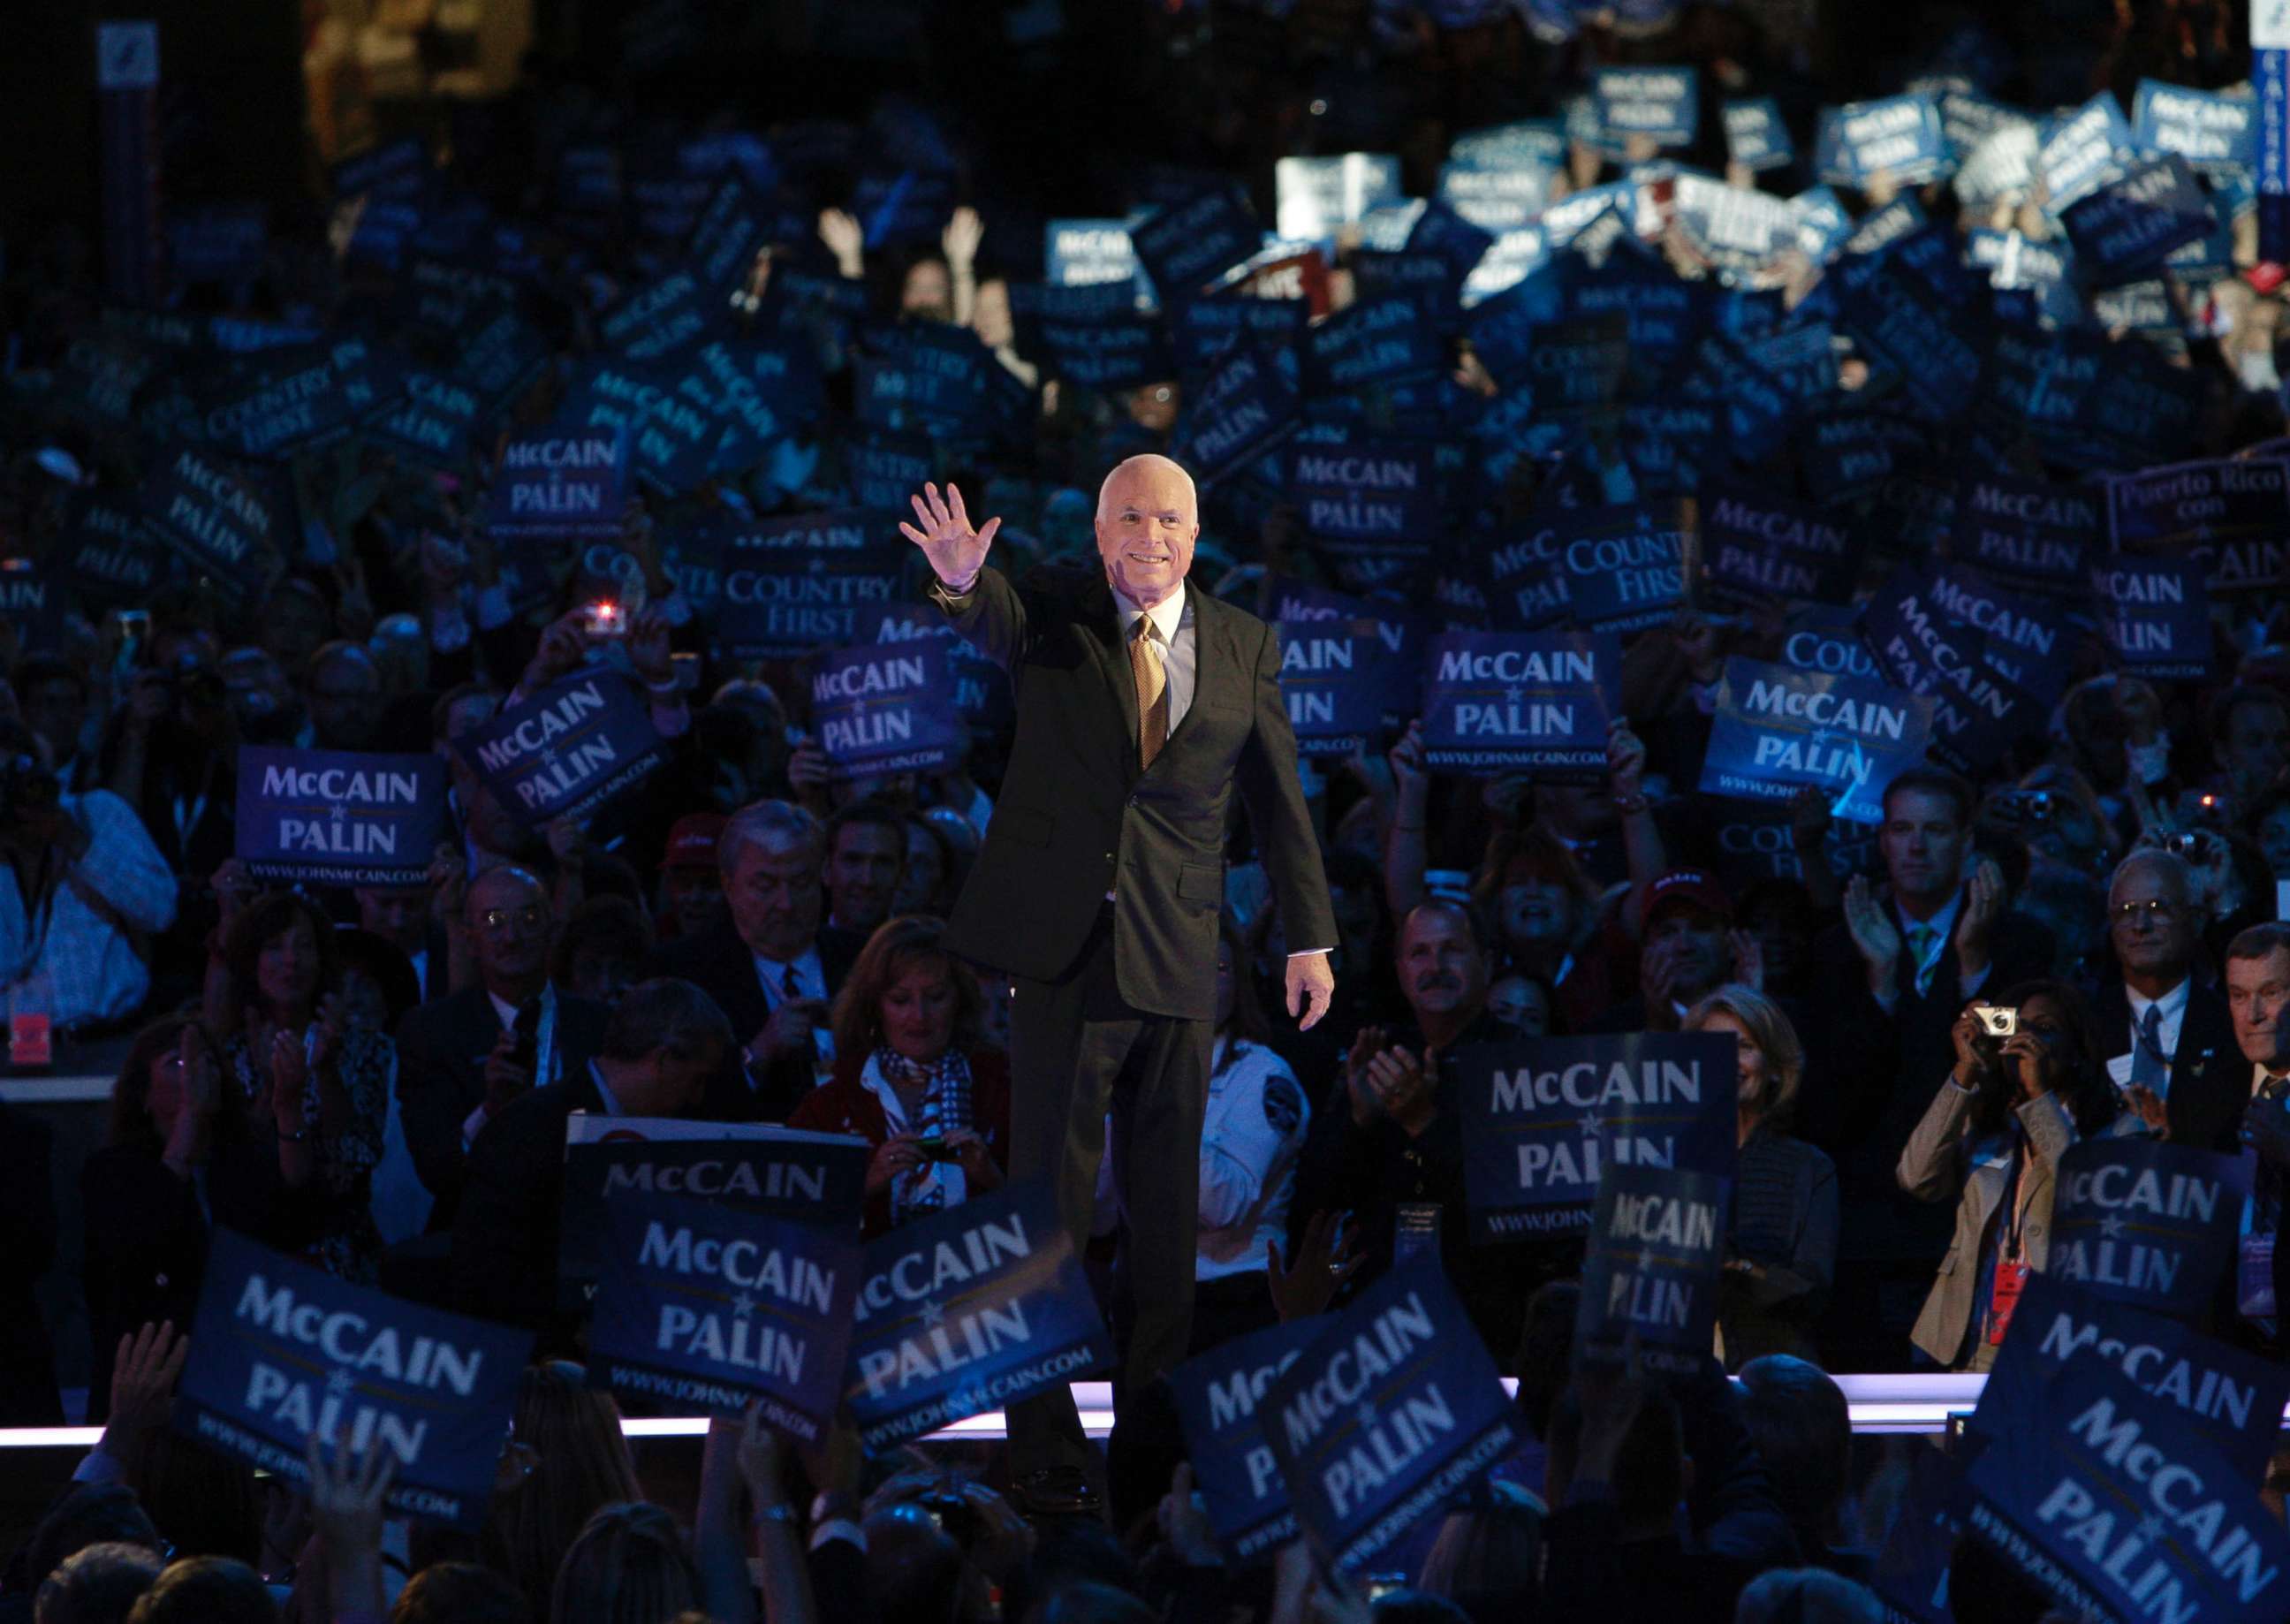 PHOTO: Senator and presidential candidate John McCain acknowledges the crowd at the Republican National Convention in St. Paul, Minn., Sept. 4, 2008.